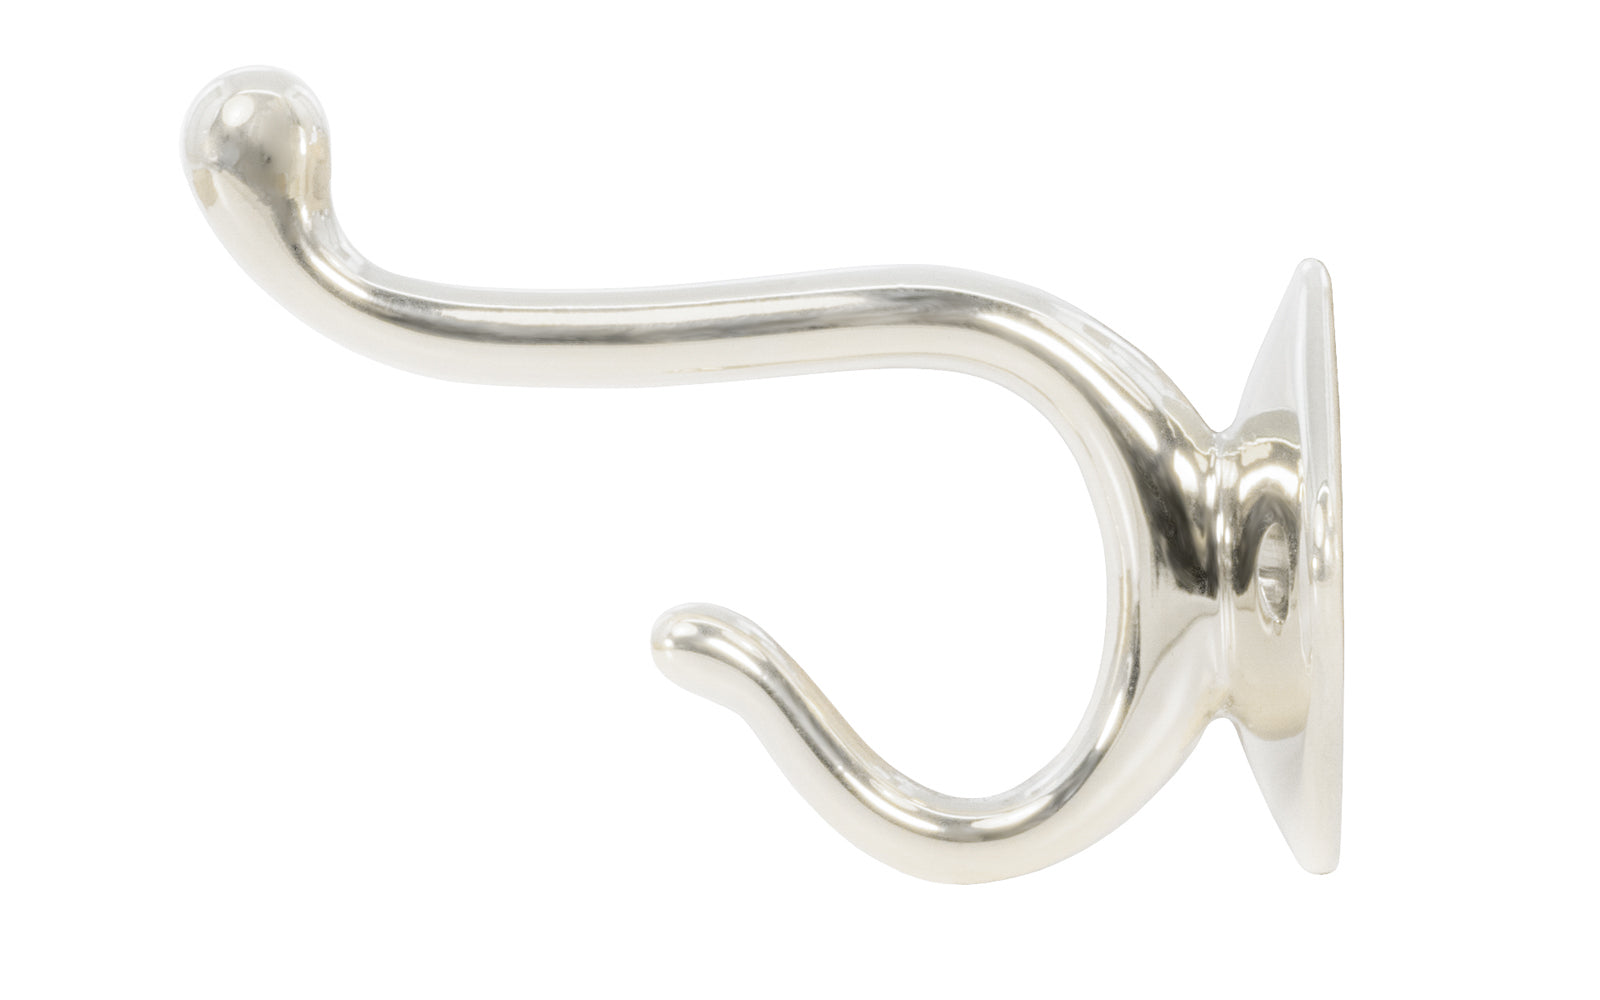 Vintage-style polished nickel finish double hook. For use in hallways, hall trees, kitchens, bathrooms, bedrooms. Made of solid brass, the hook is sturdy for heavy coats, bags & clothing. The hook is designed in a early 20th Century style, Arts & Crafts style of hardware. Bright Nickel. Authentic reproduction hardware